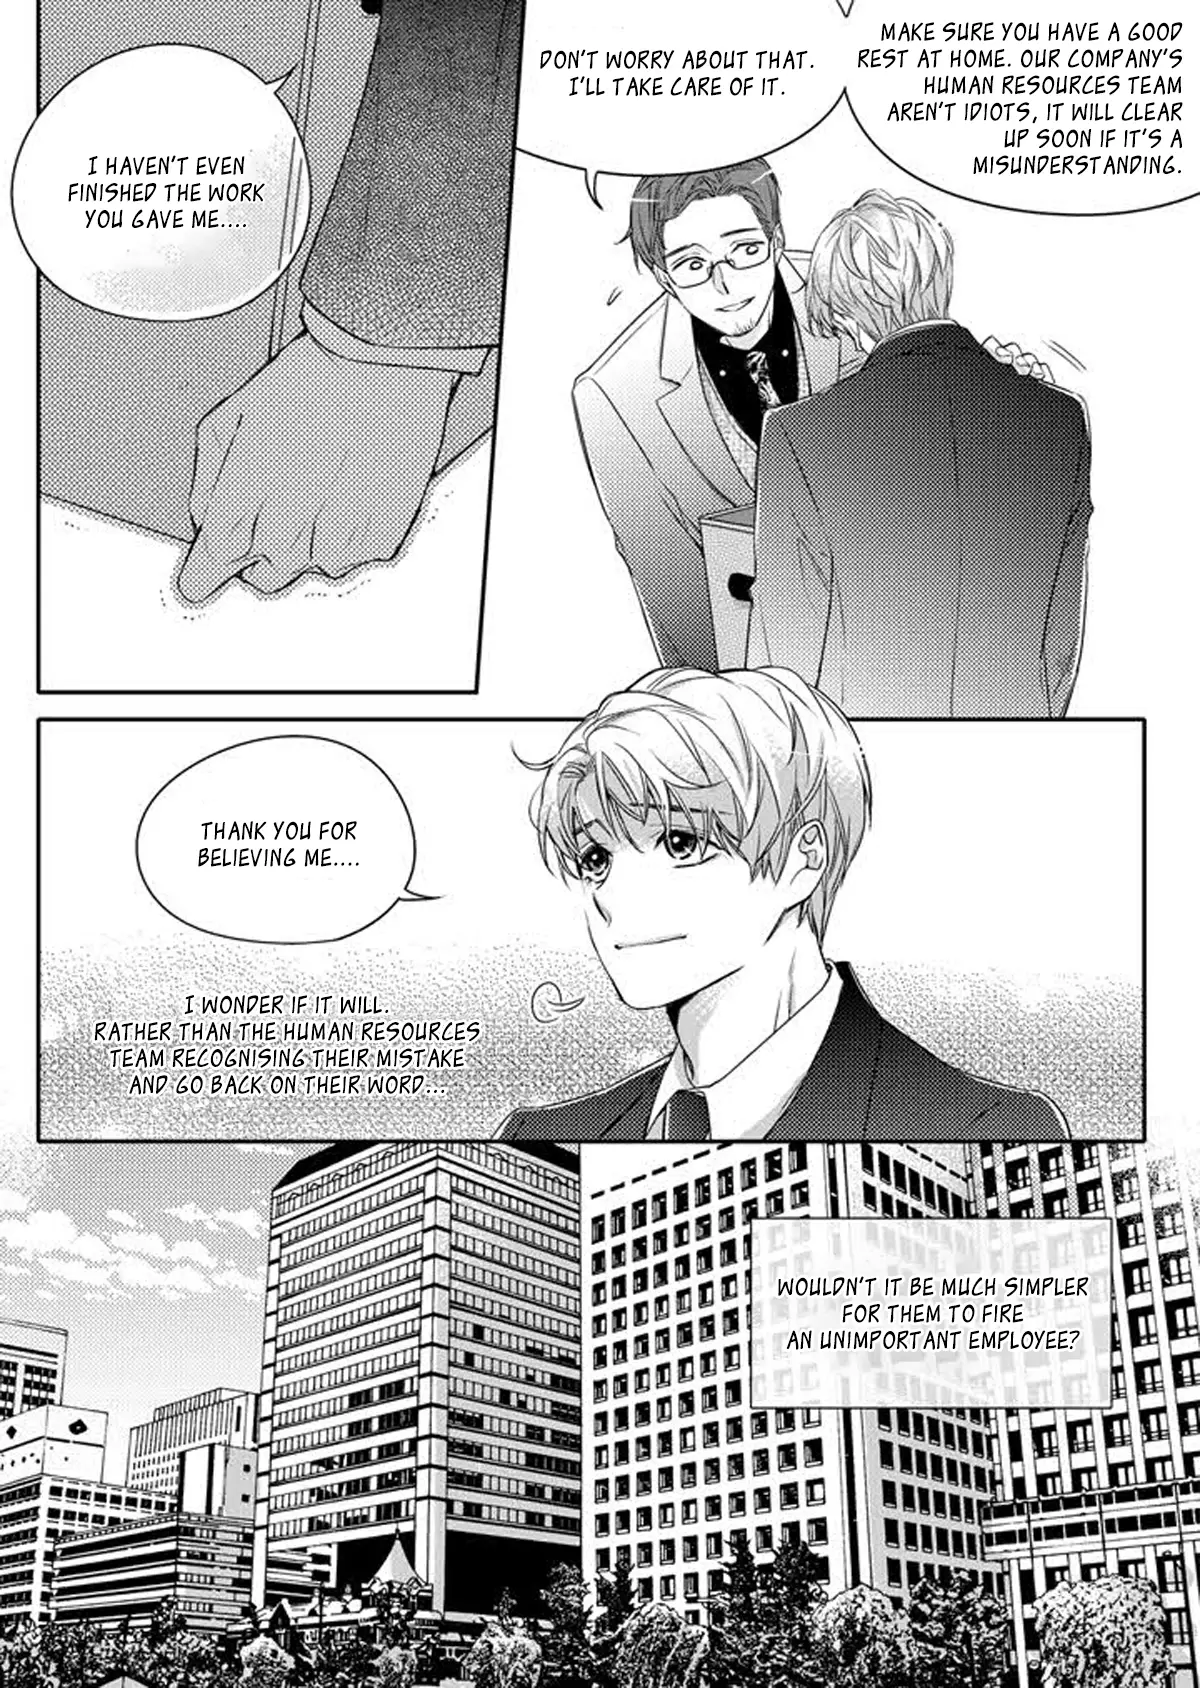 Unintentional Love Story - 1 page 6